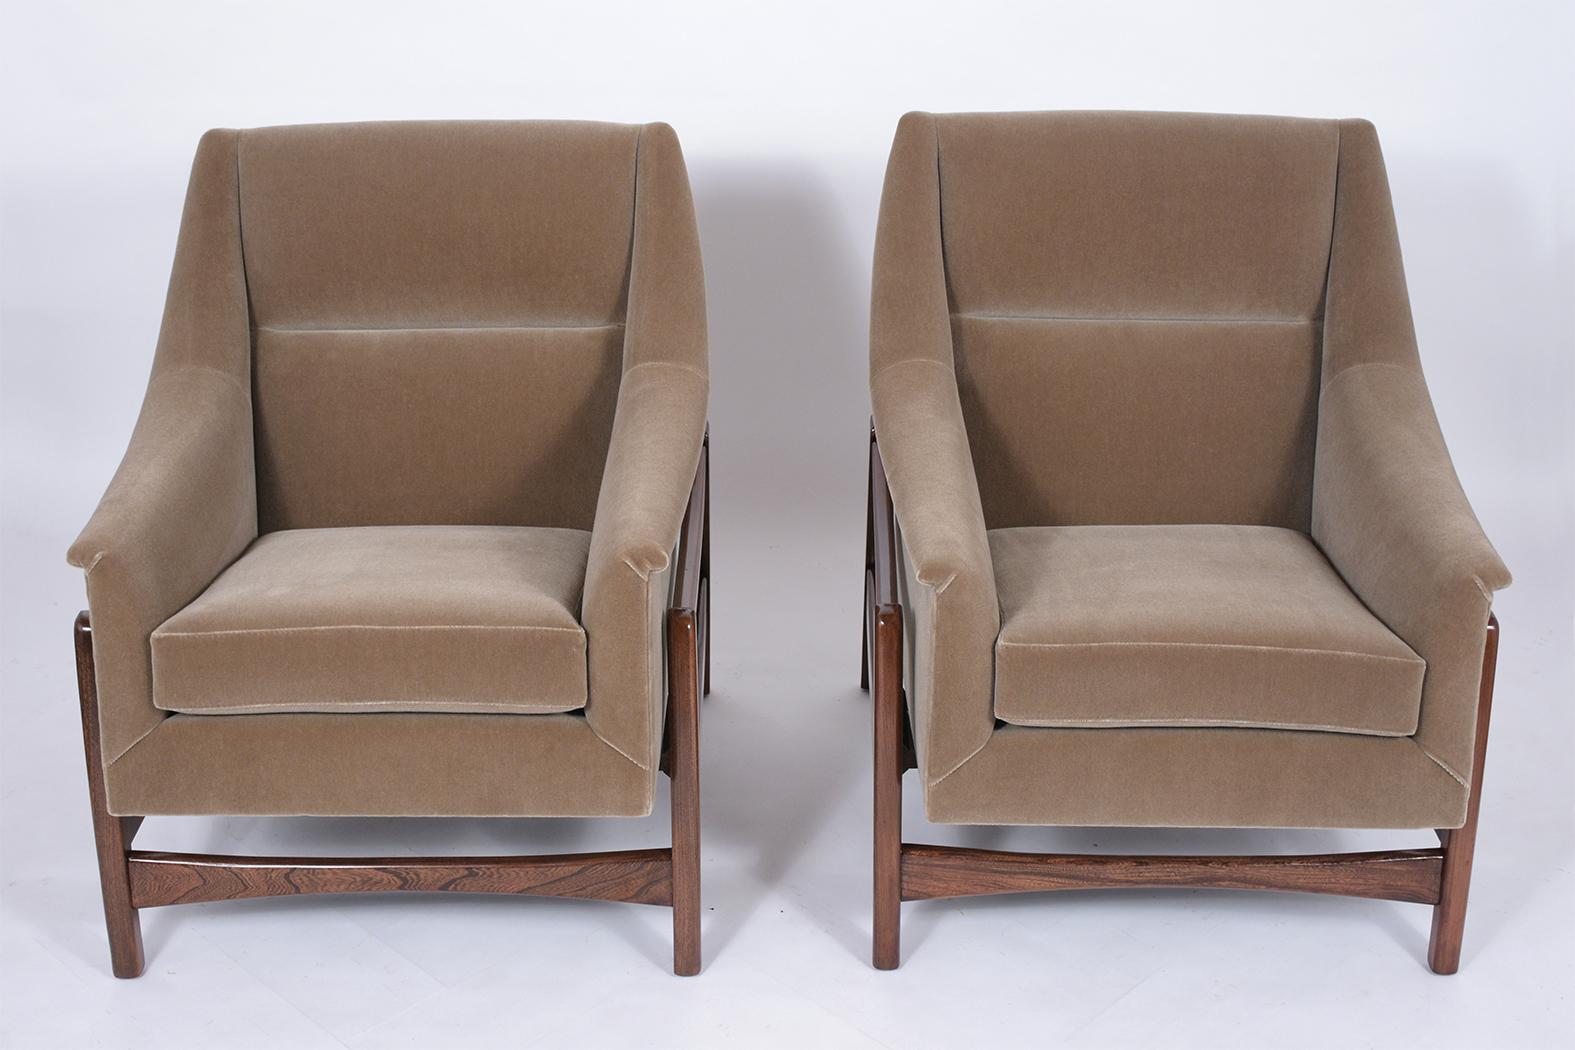 Hand-Crafted Pair of Mid-Century Modern Rocking Chairs